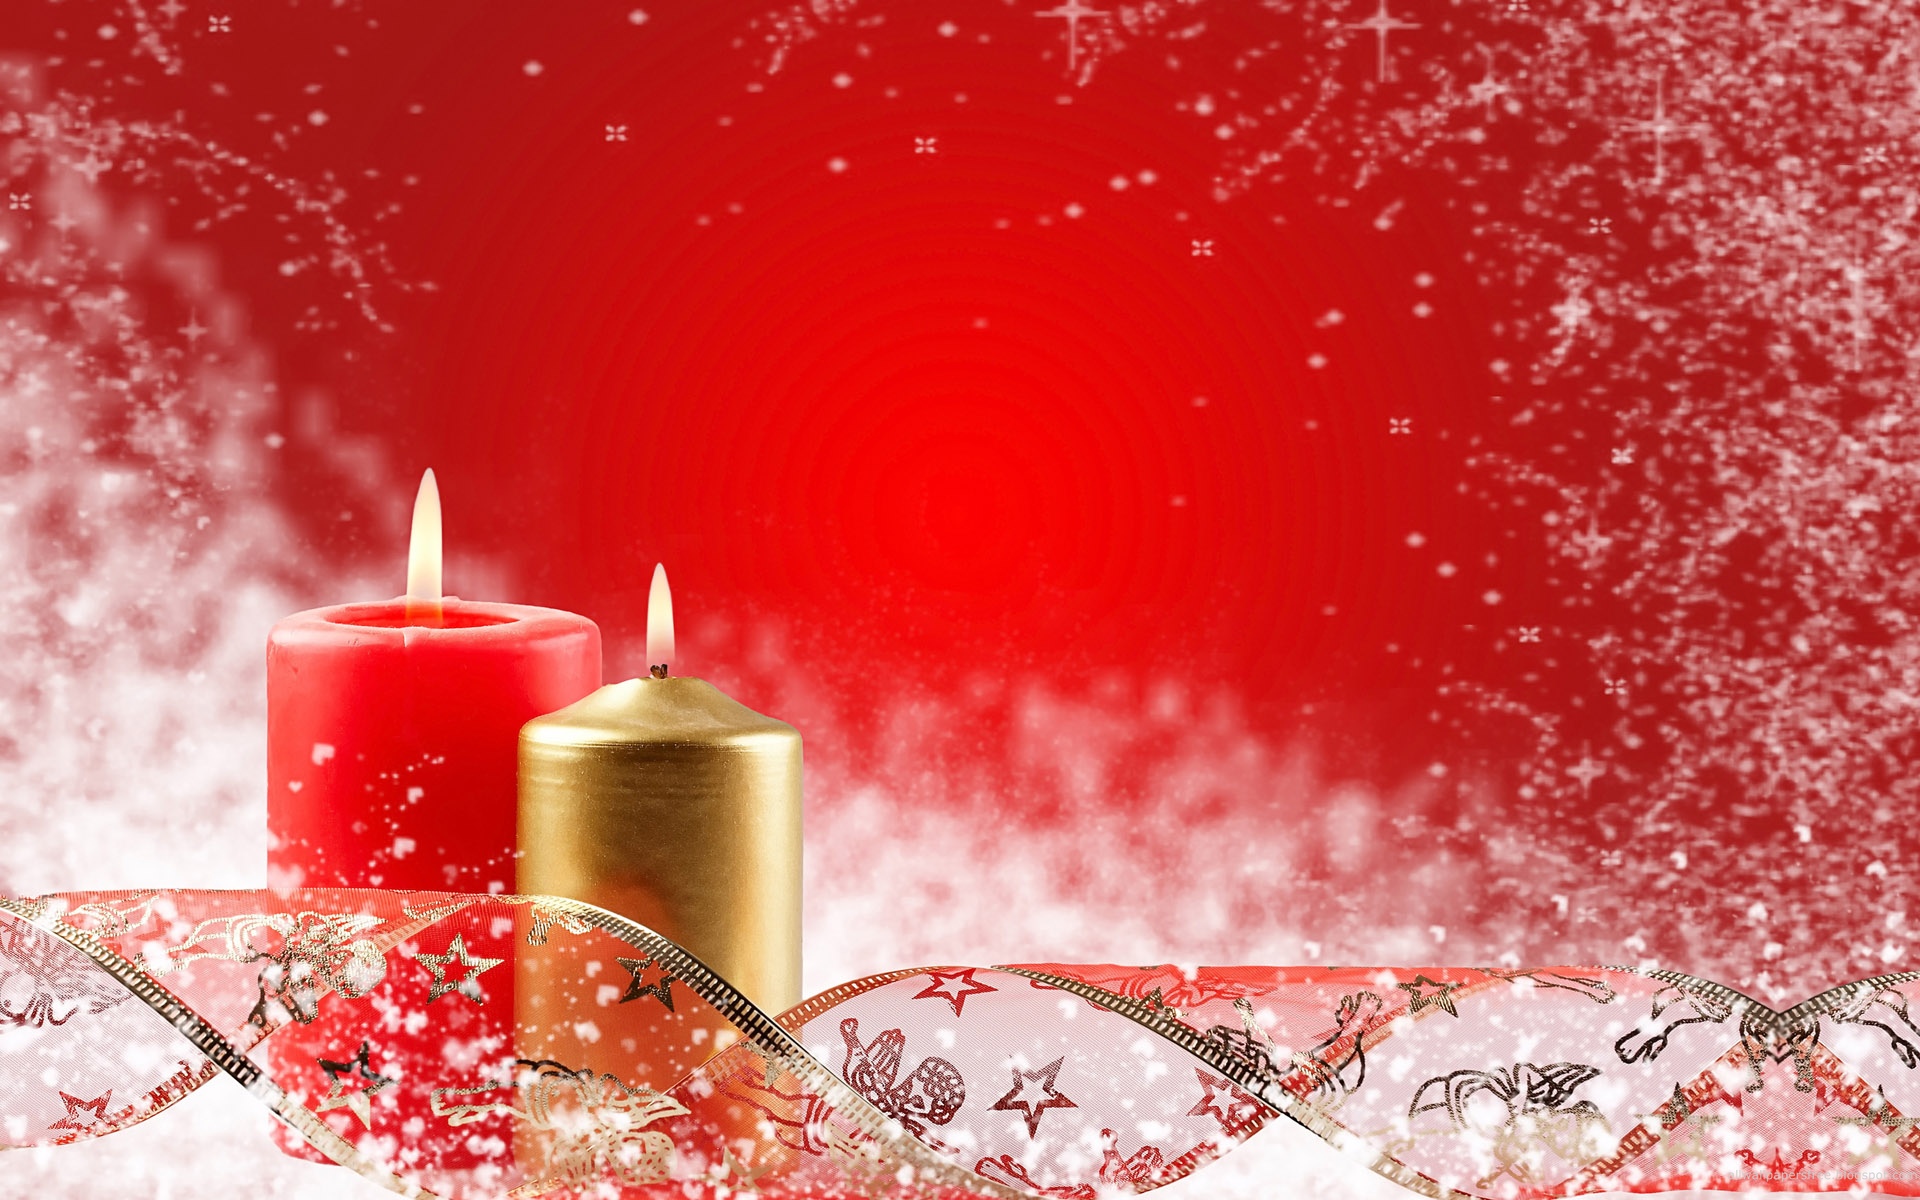 Sfondi Natalizi In Hd.Cool Hd Wallpapers Christmas Candles Wallpaper For Desktop Background